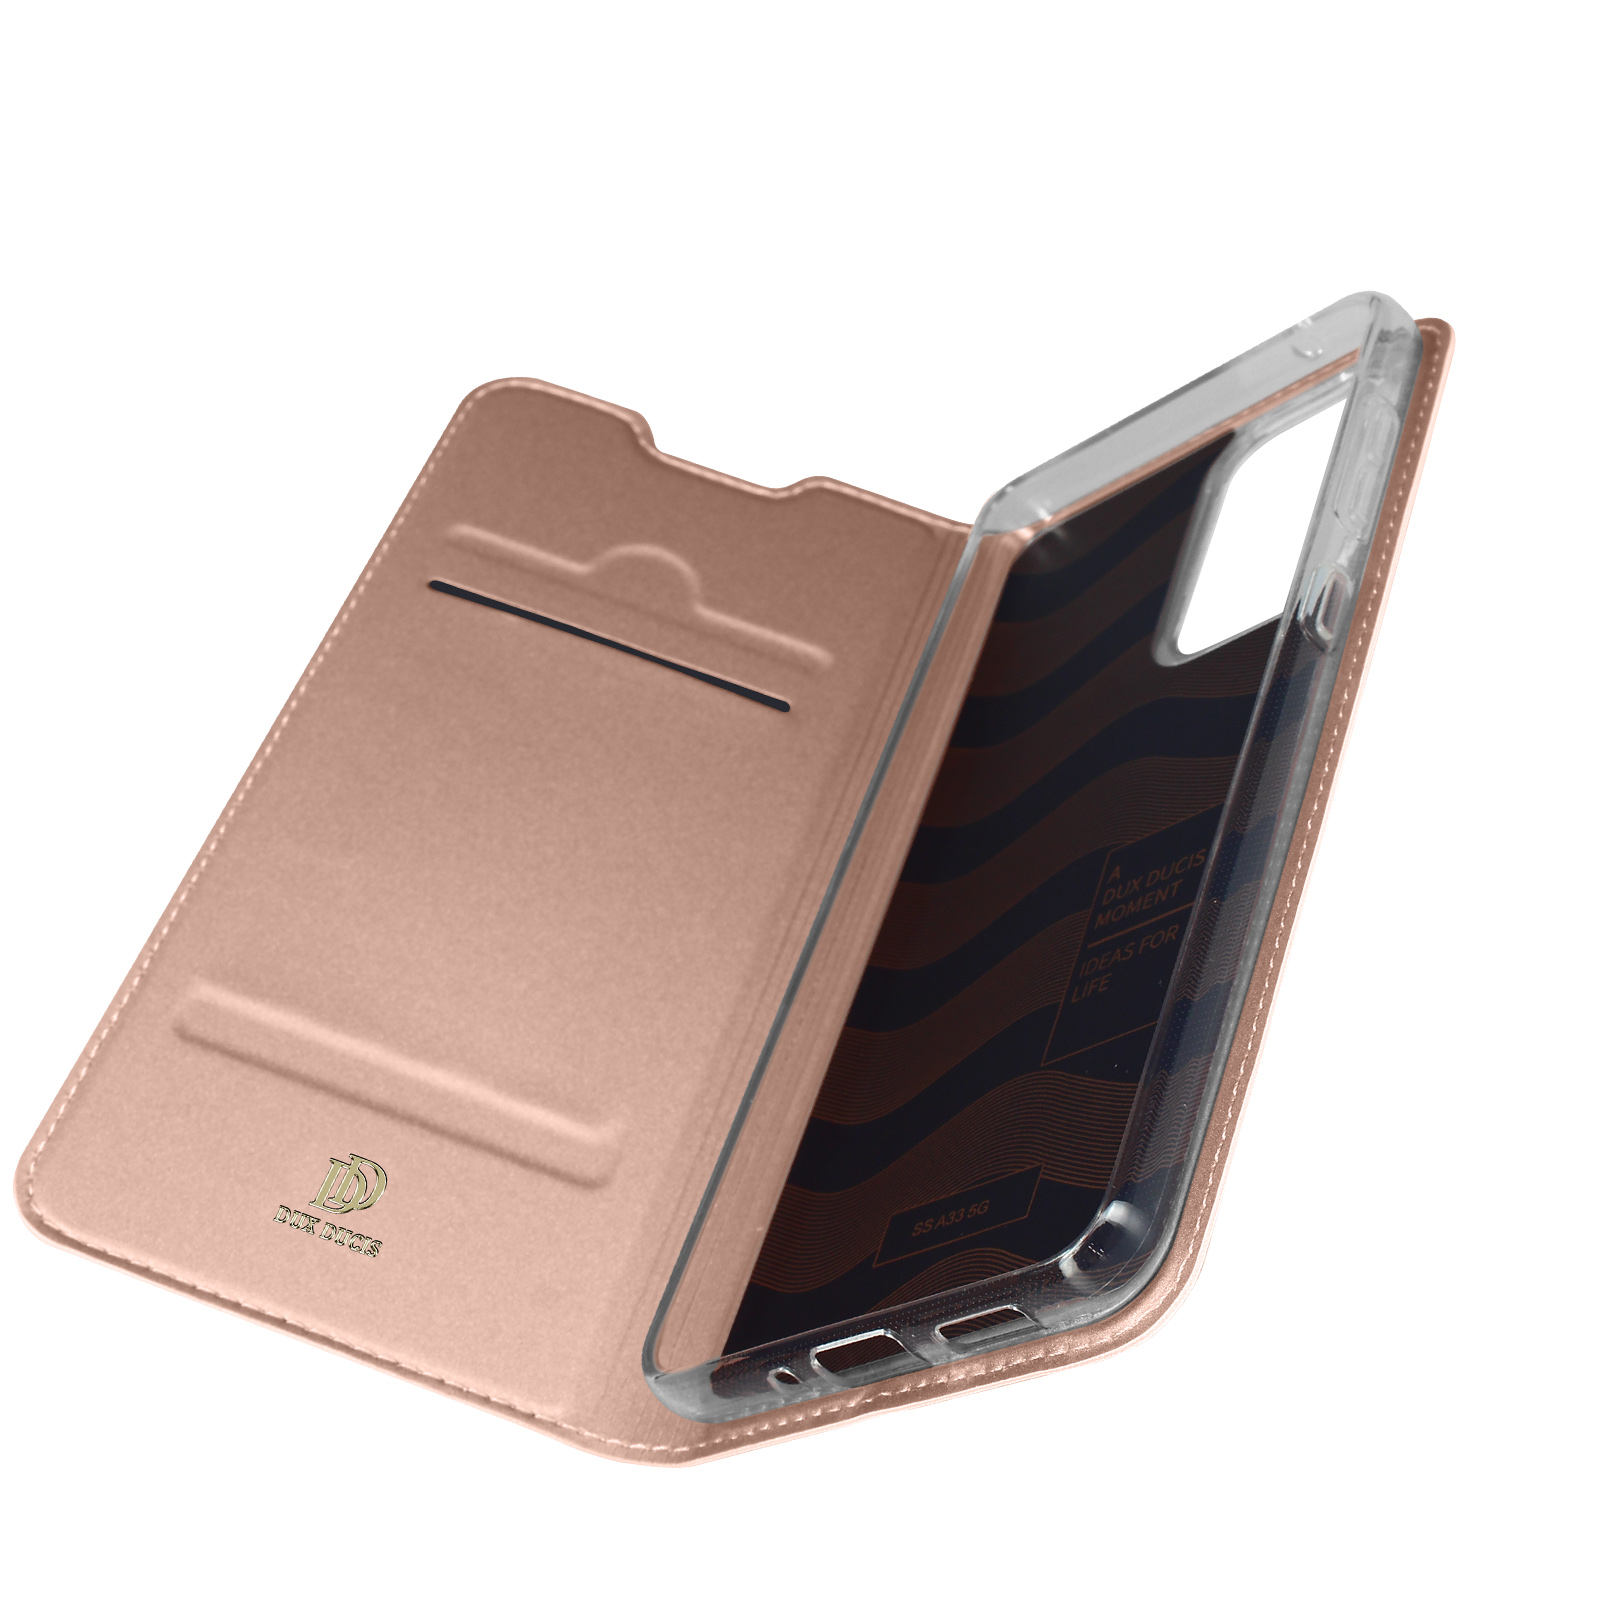 DUX A33 Samsung, Bookcover, Rosegold 5G, Galaxy DUCIS Pro Series,